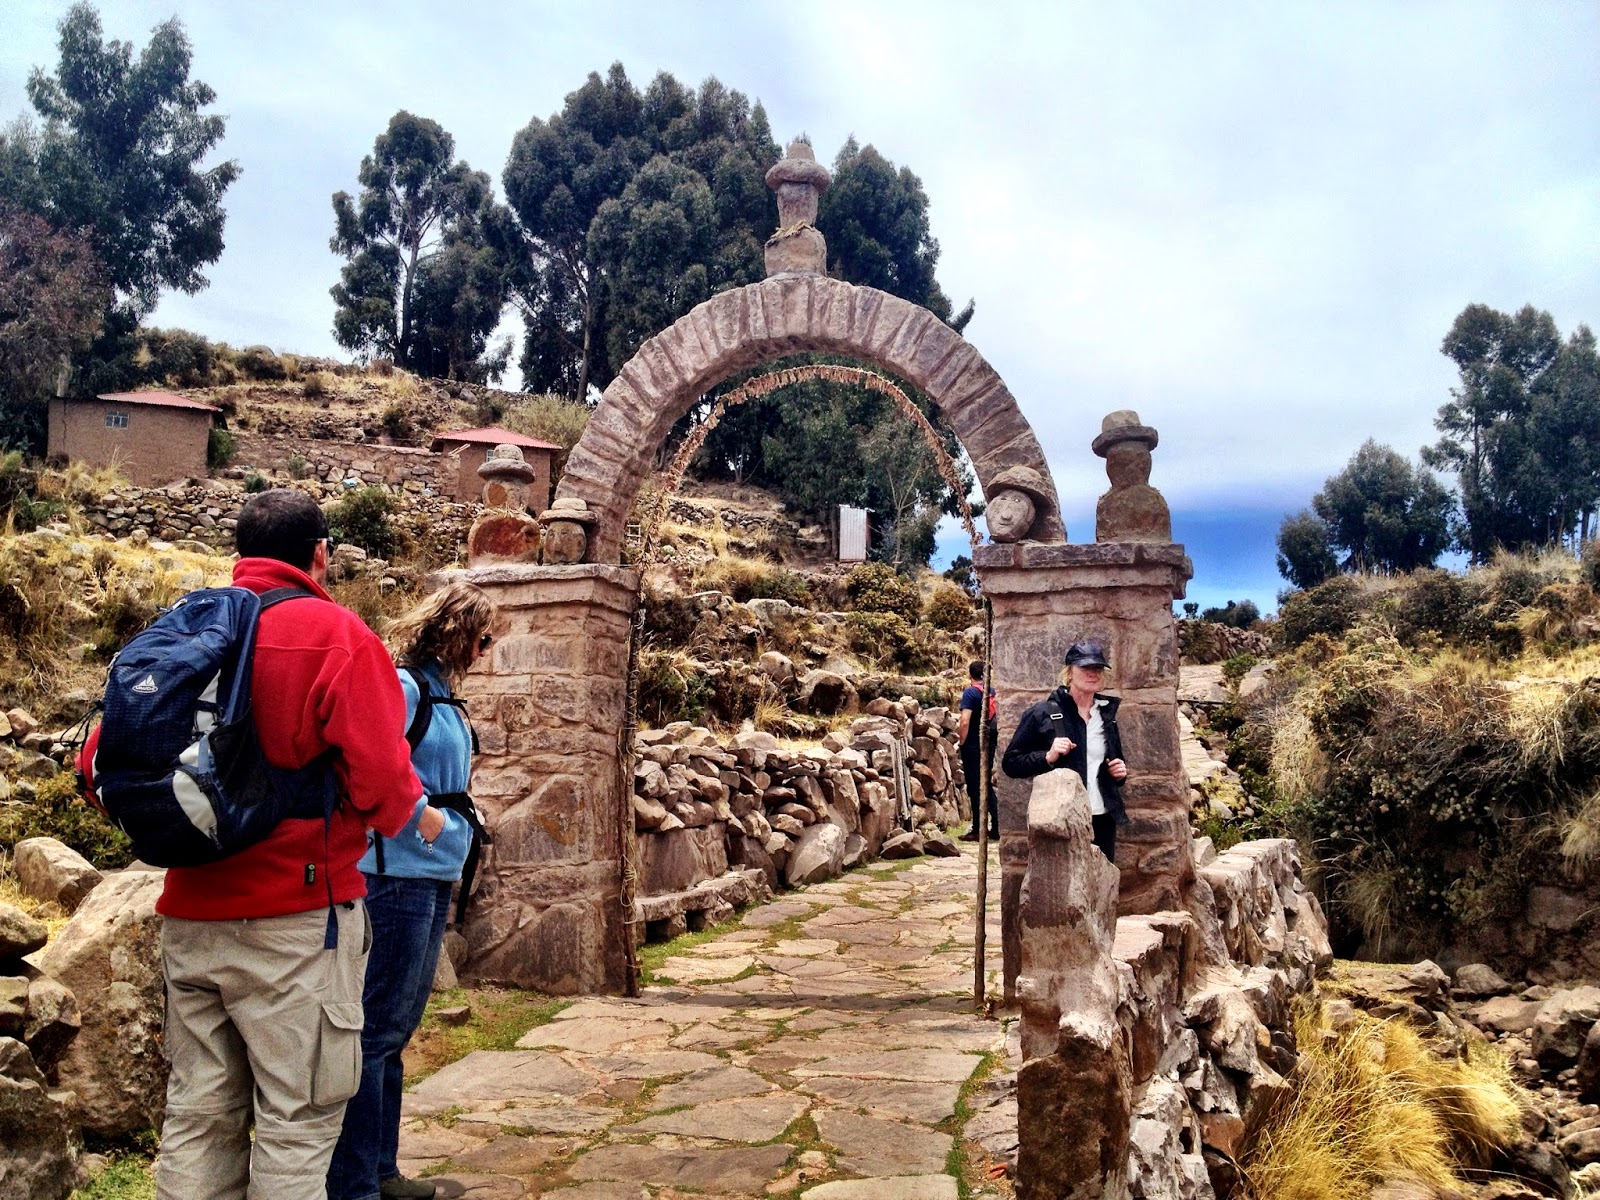 The arch leading to the main square - Taquile Island